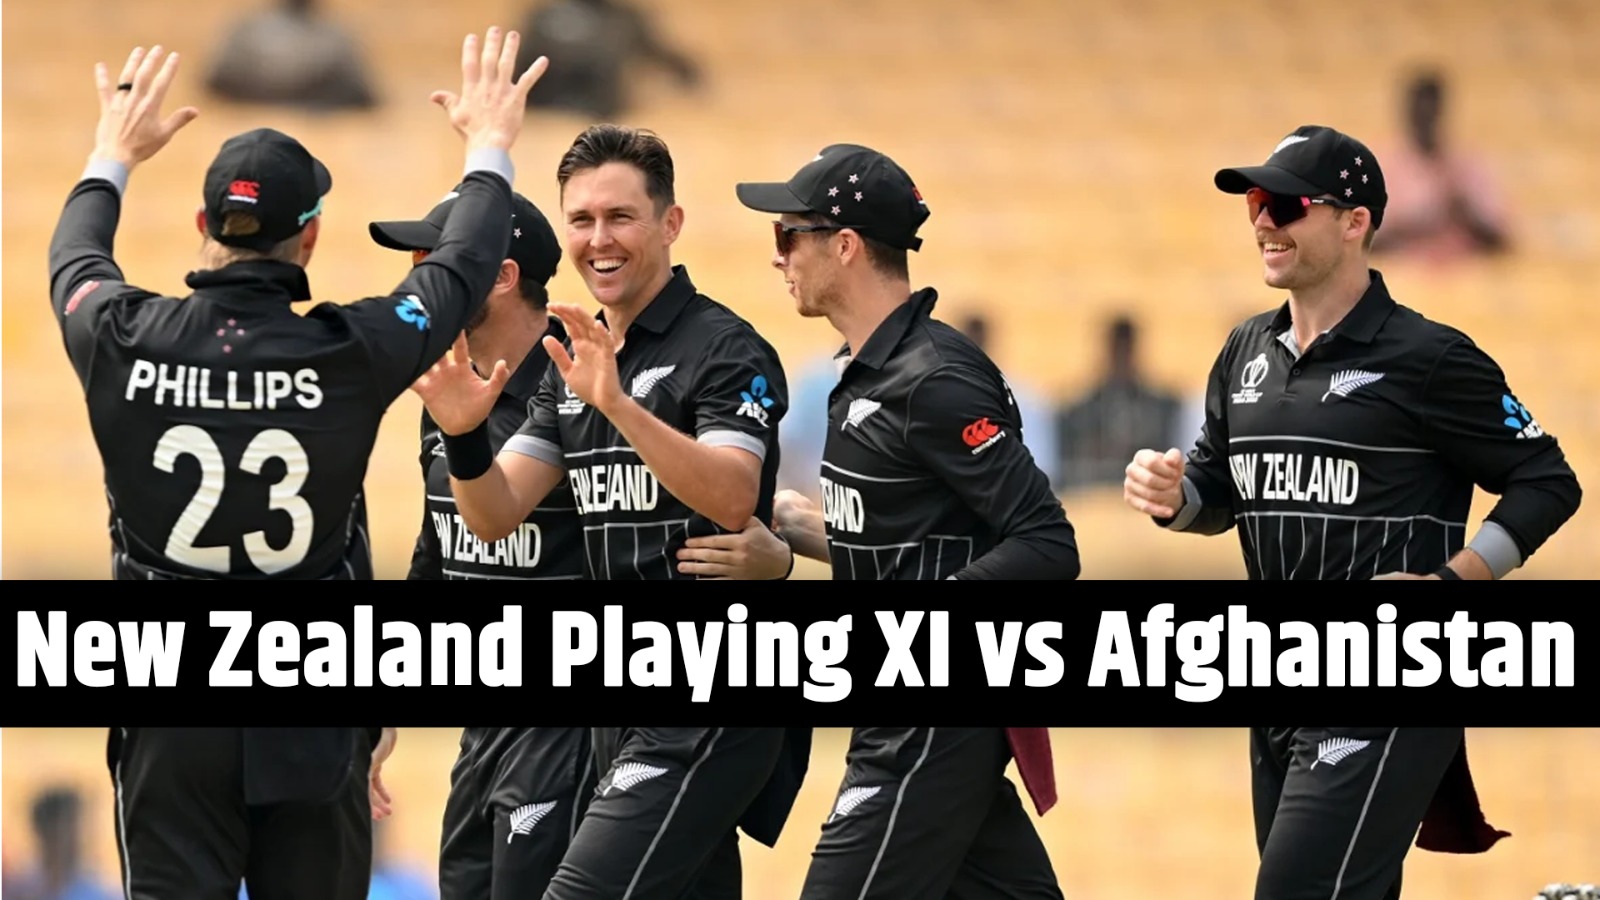 NZ Playing XI Against AFG: New Zealand Playing XI against Afghanistan, Match No. 16, ICC Cricket World Cup 2023